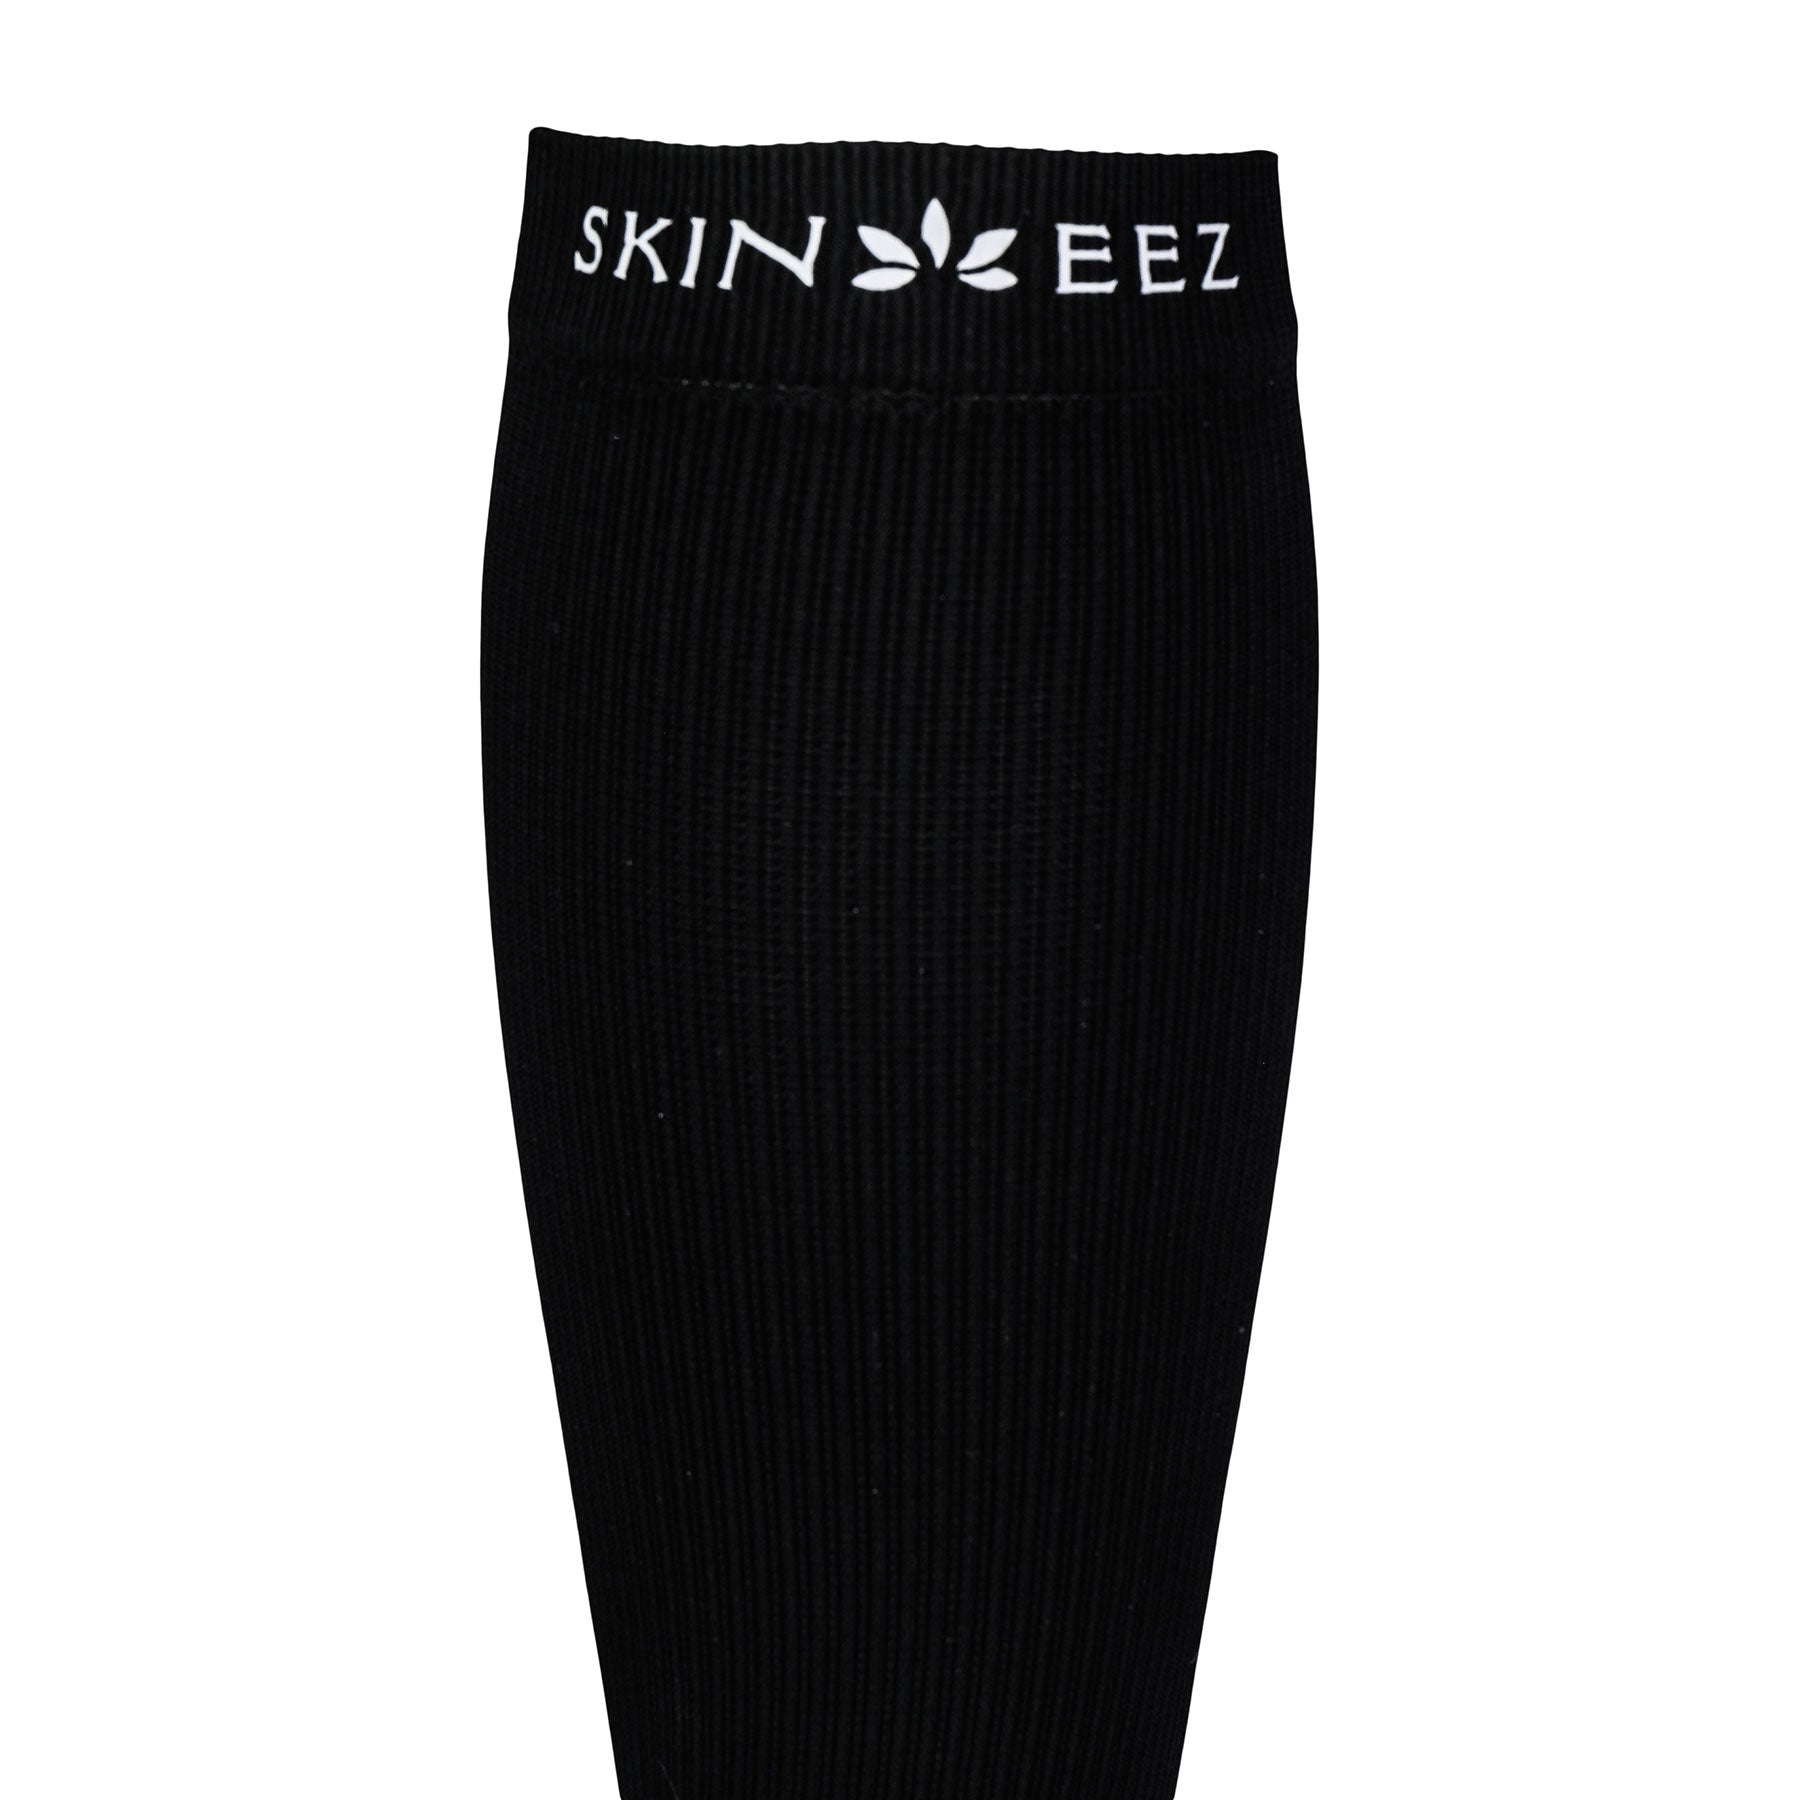 SIGVARIS Performance Compression Calf Sleeve : : Health & Personal  Care